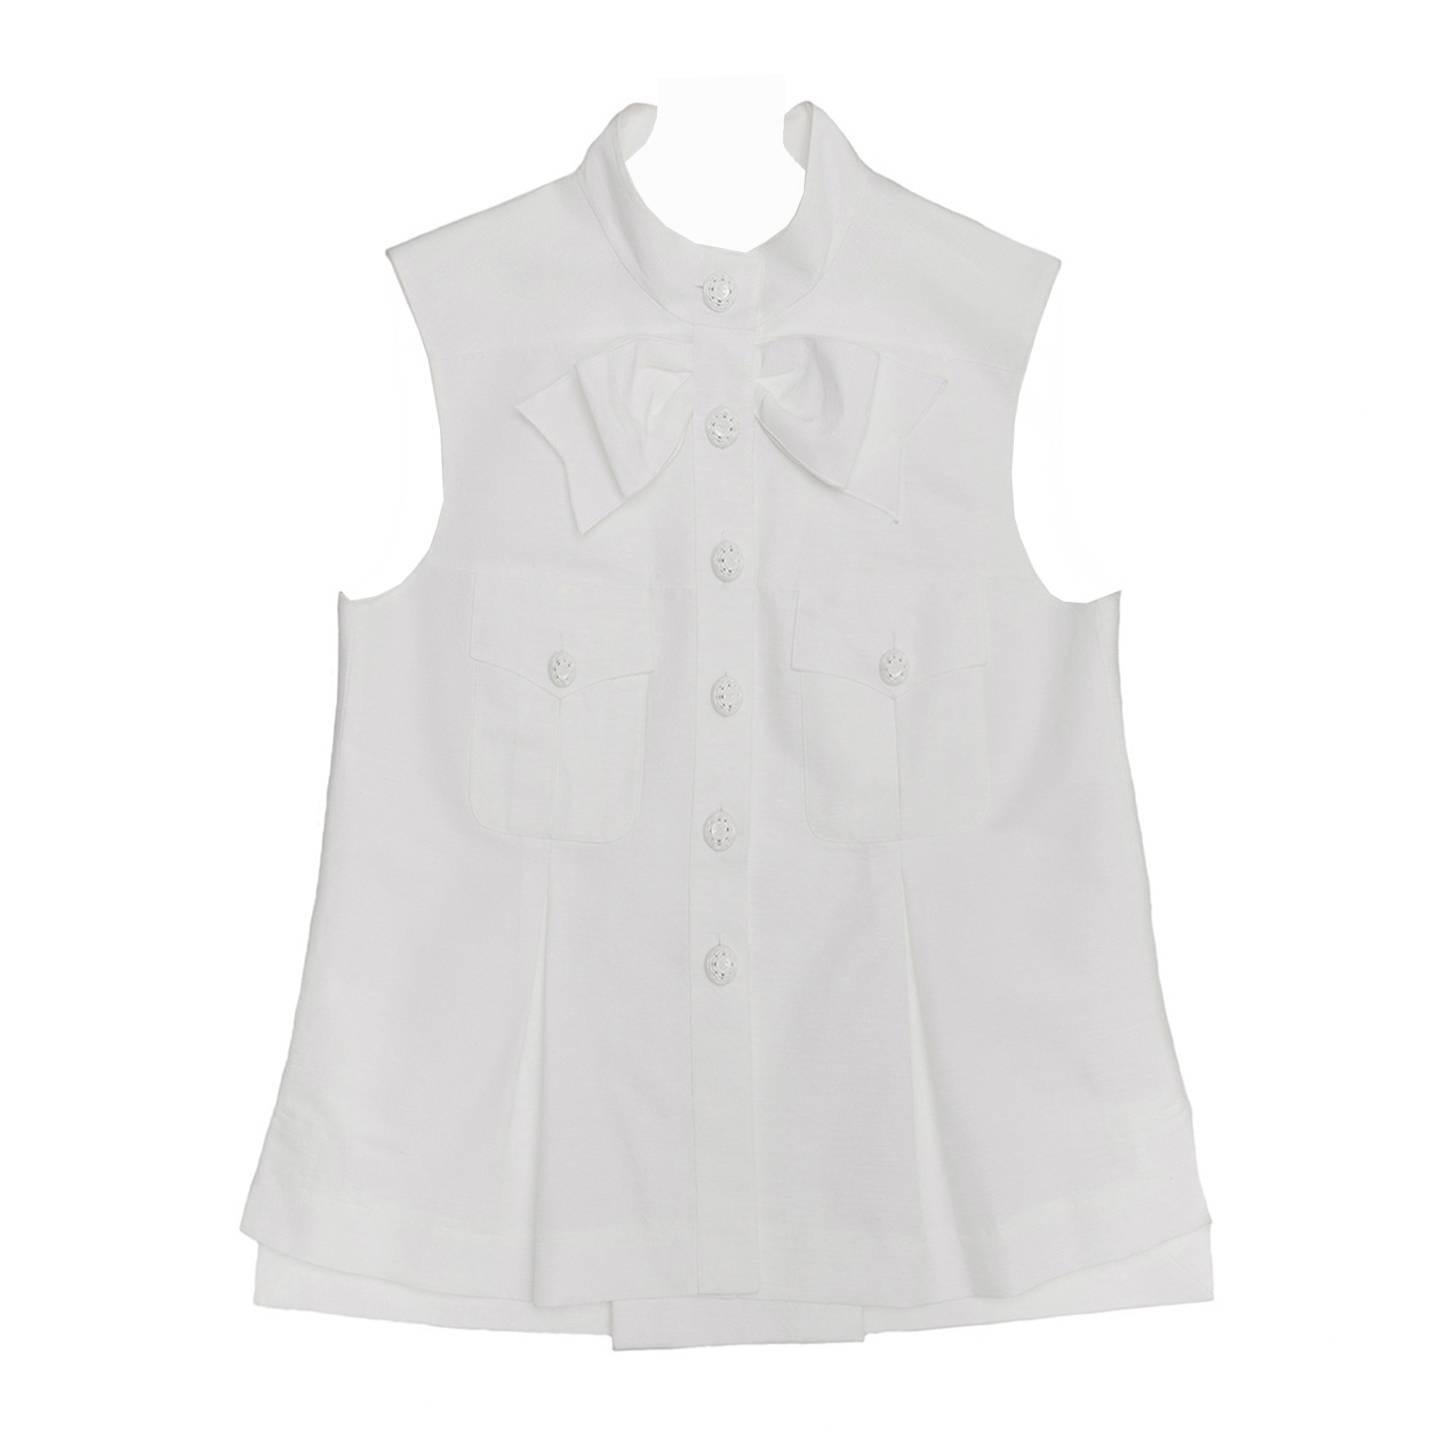 Chanel White Sleeveless Top or Jacket With Bow Detail